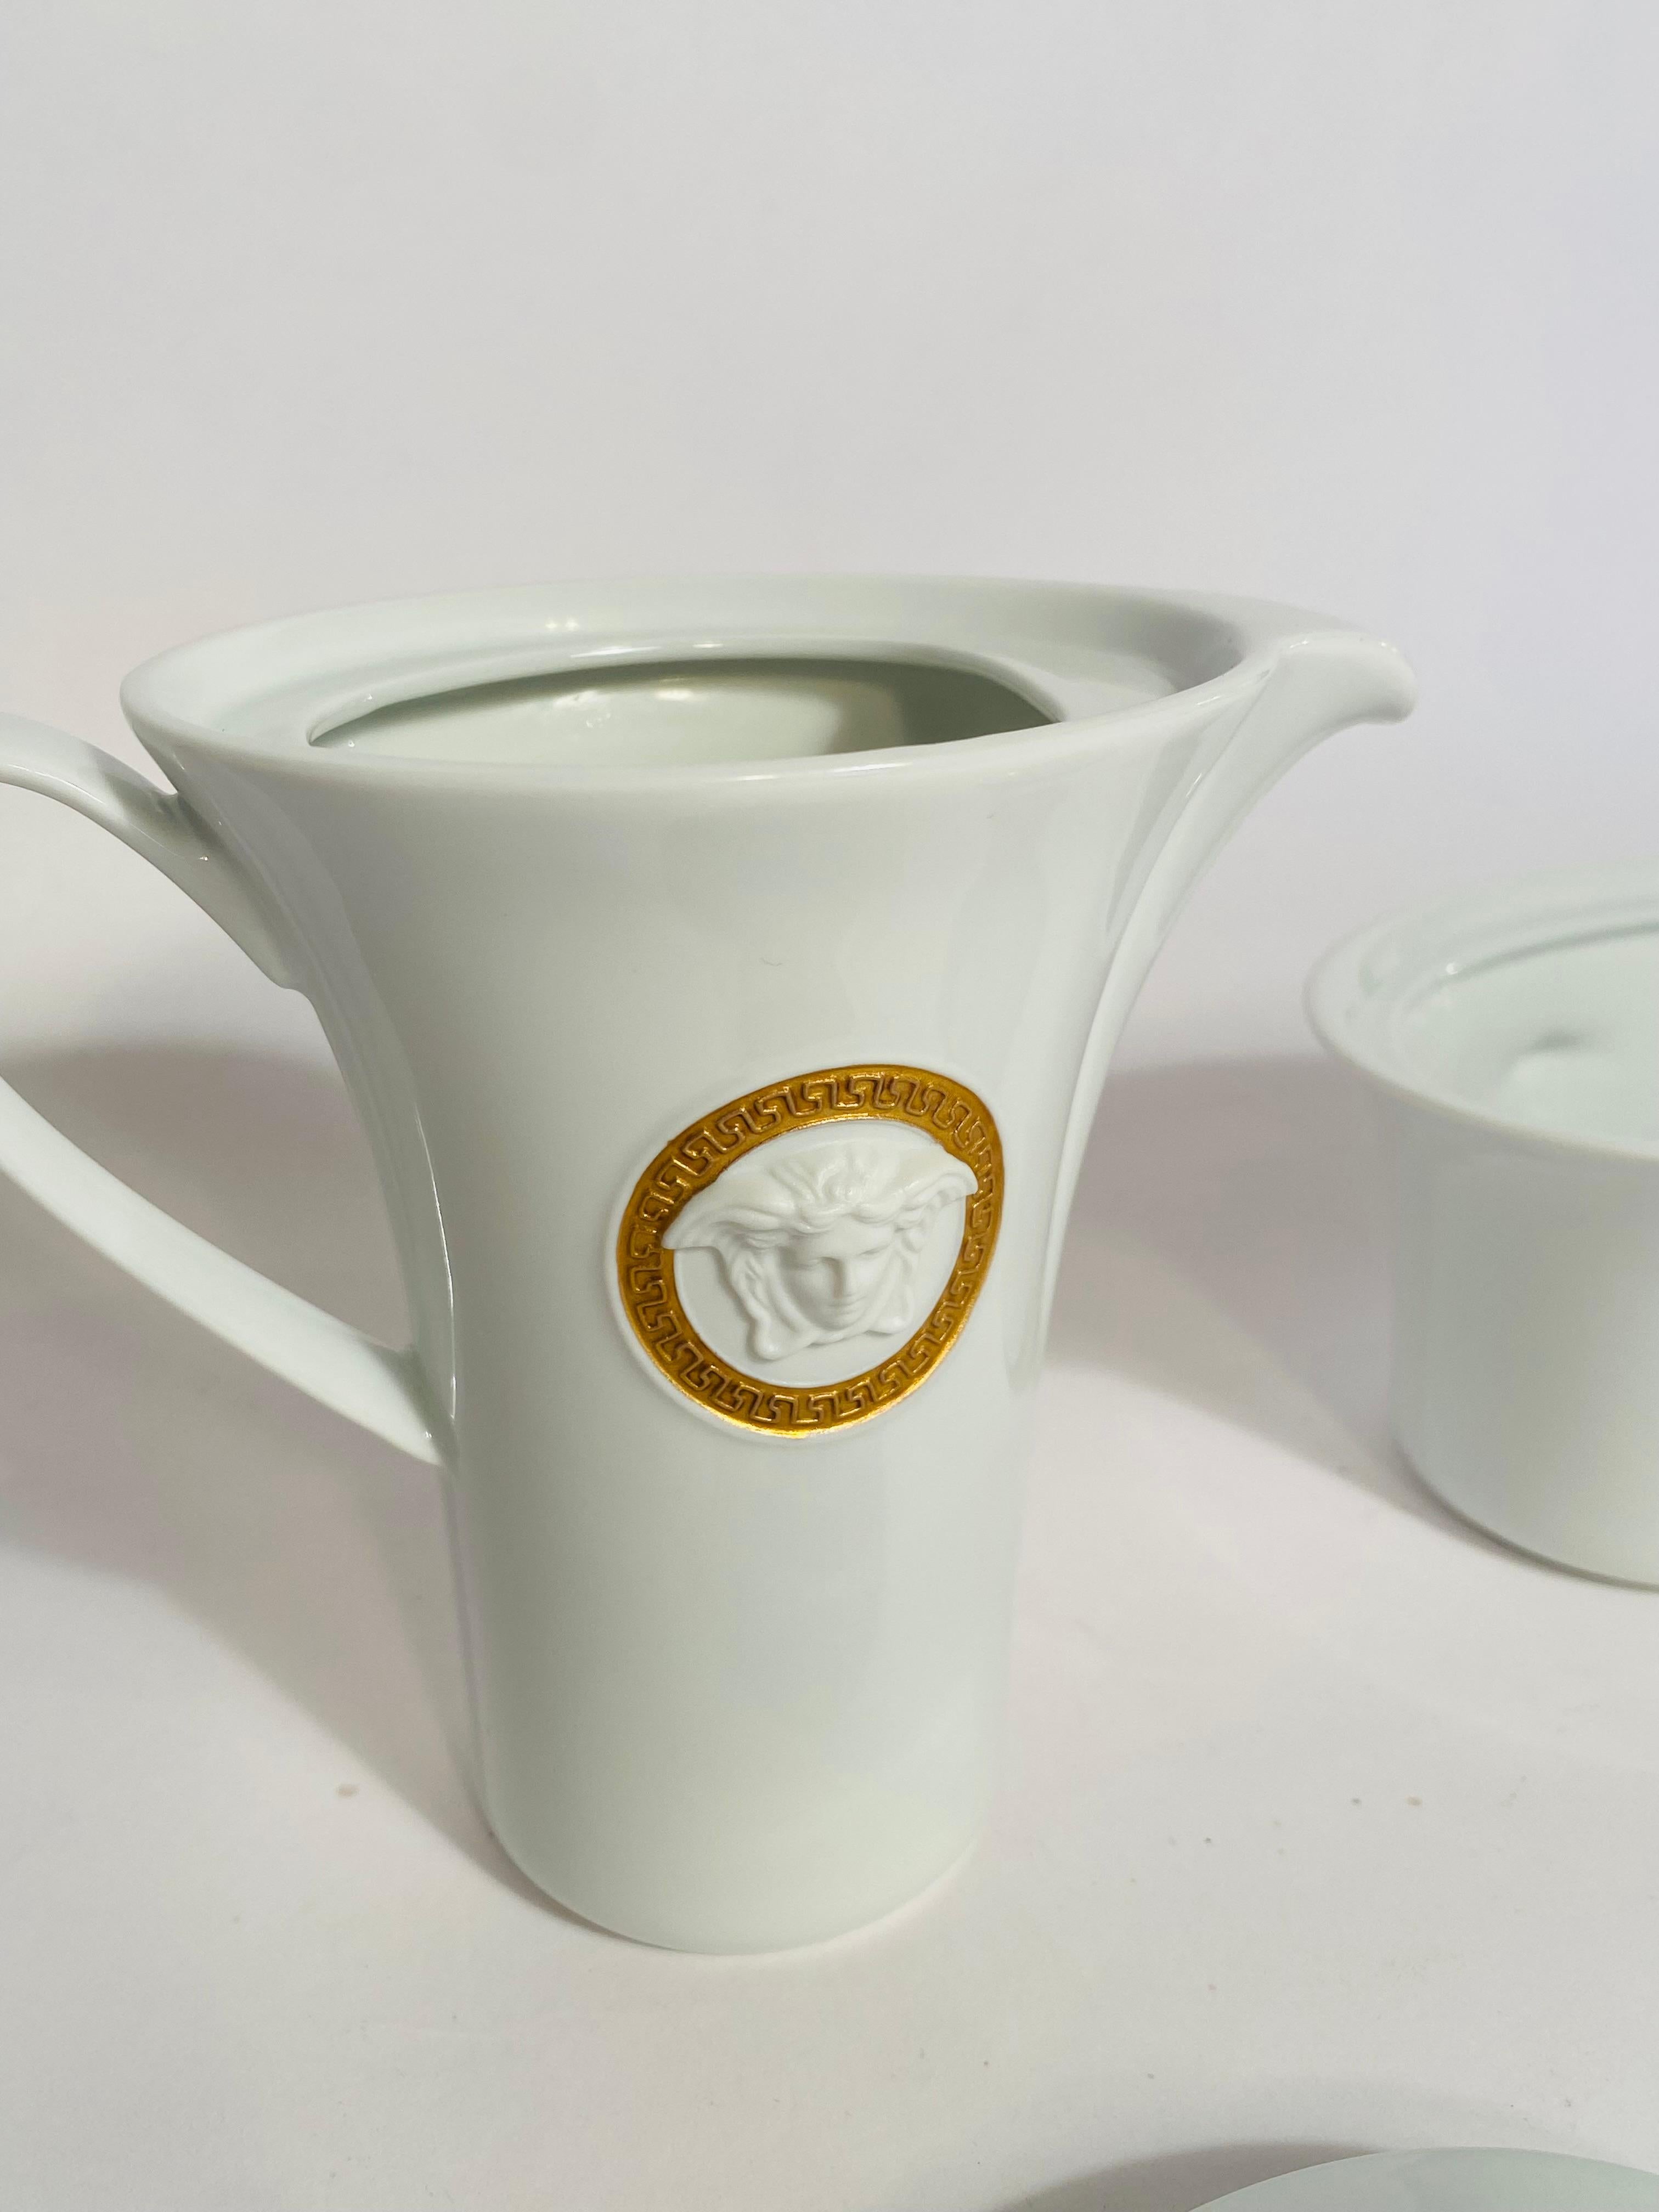 Versace Designed Crisp White Porcelain with raised Medusa Medallion Head in their collars. This pattern has Versace's signature design featuring the figurehead of Medusa. The Medallion Meandre D'or pattern is meticulously produced by Rosenthal of